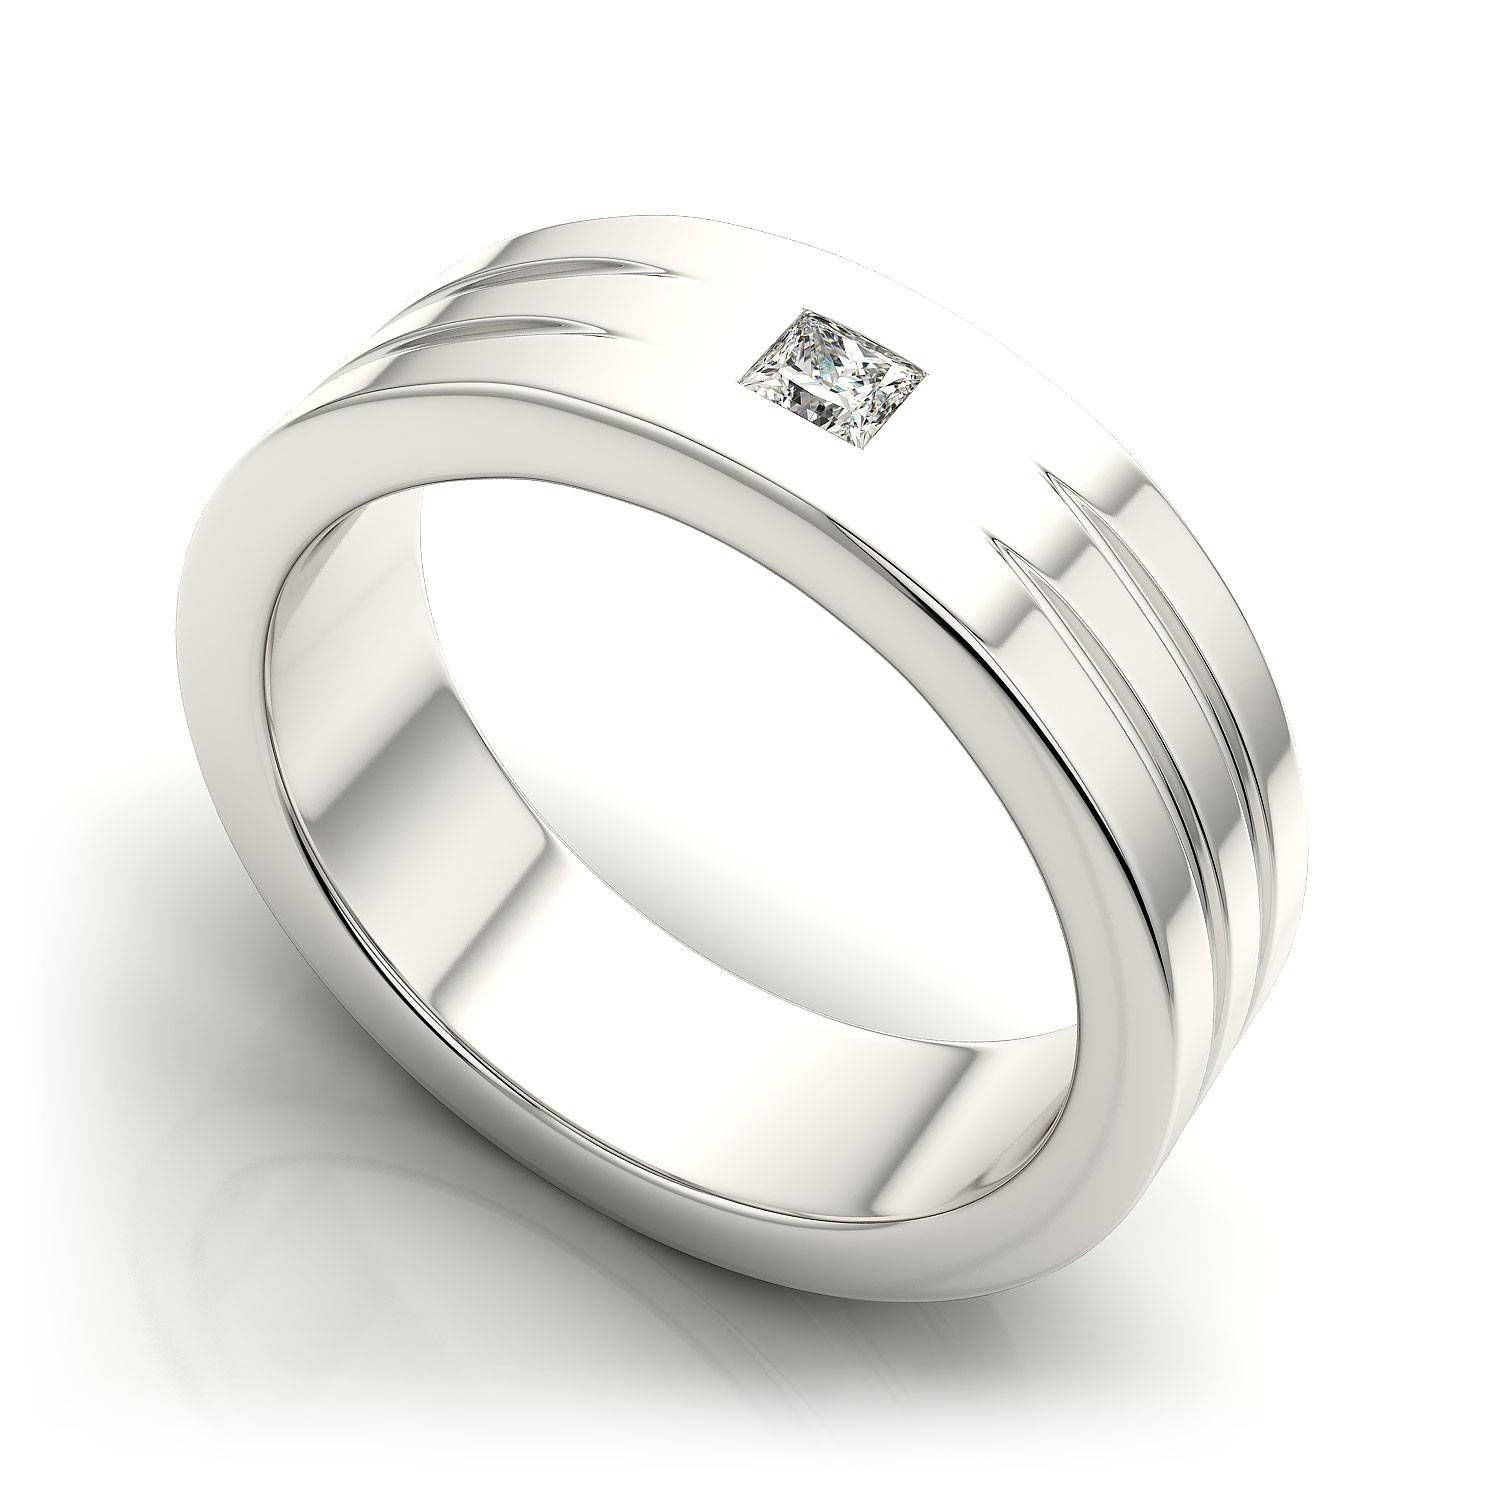 10 Ctw 7mm Men's Square Cut Diamond Ring In 18k White Gold With Regard To Square Mens Wedding Rings (View 14 of 15)